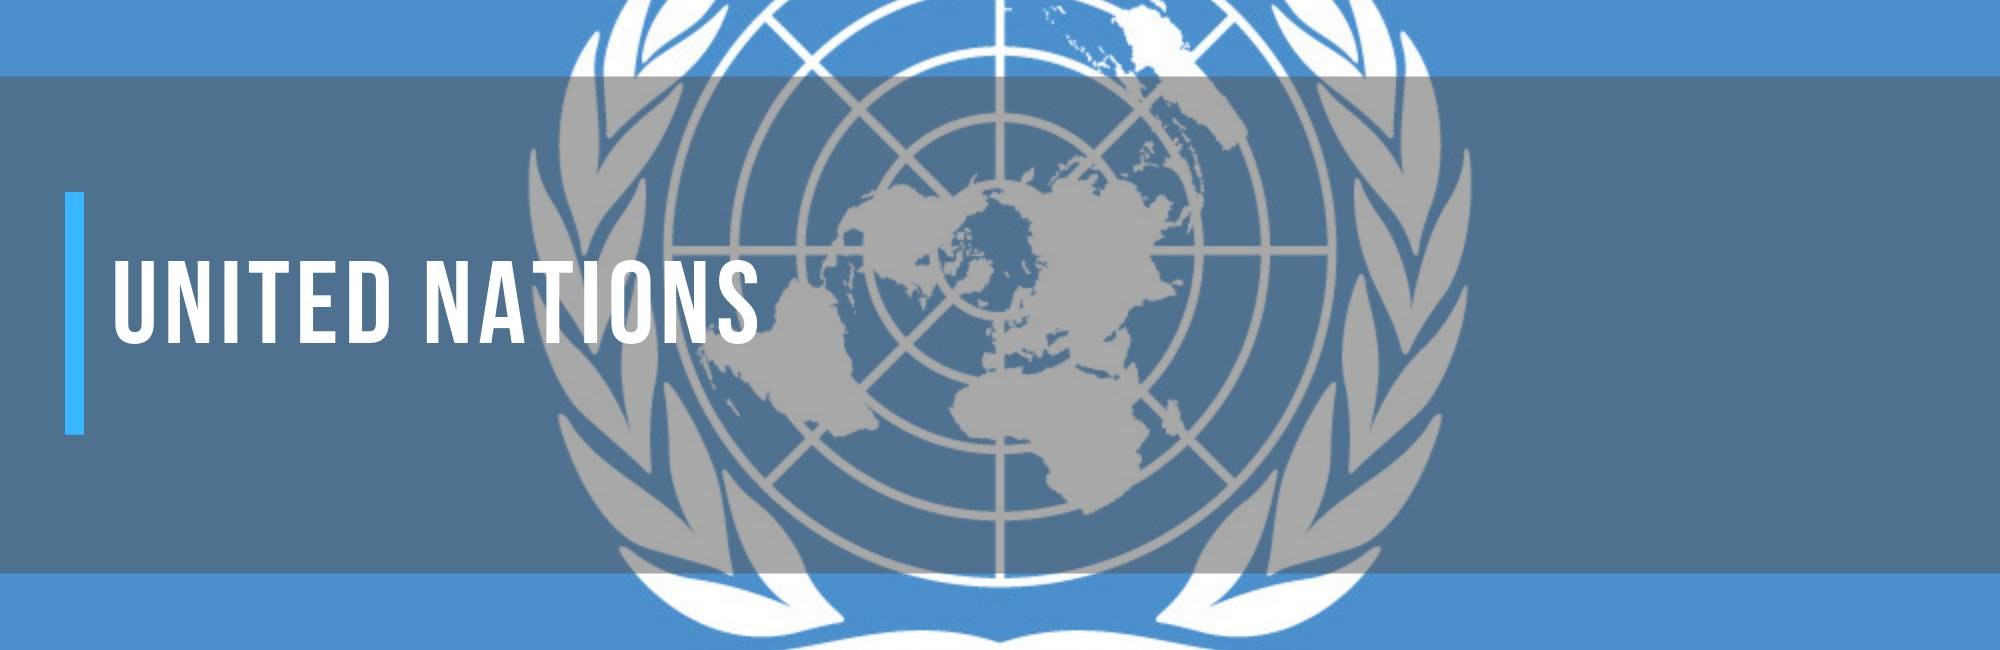 United Nations Flag, Text: United Nations